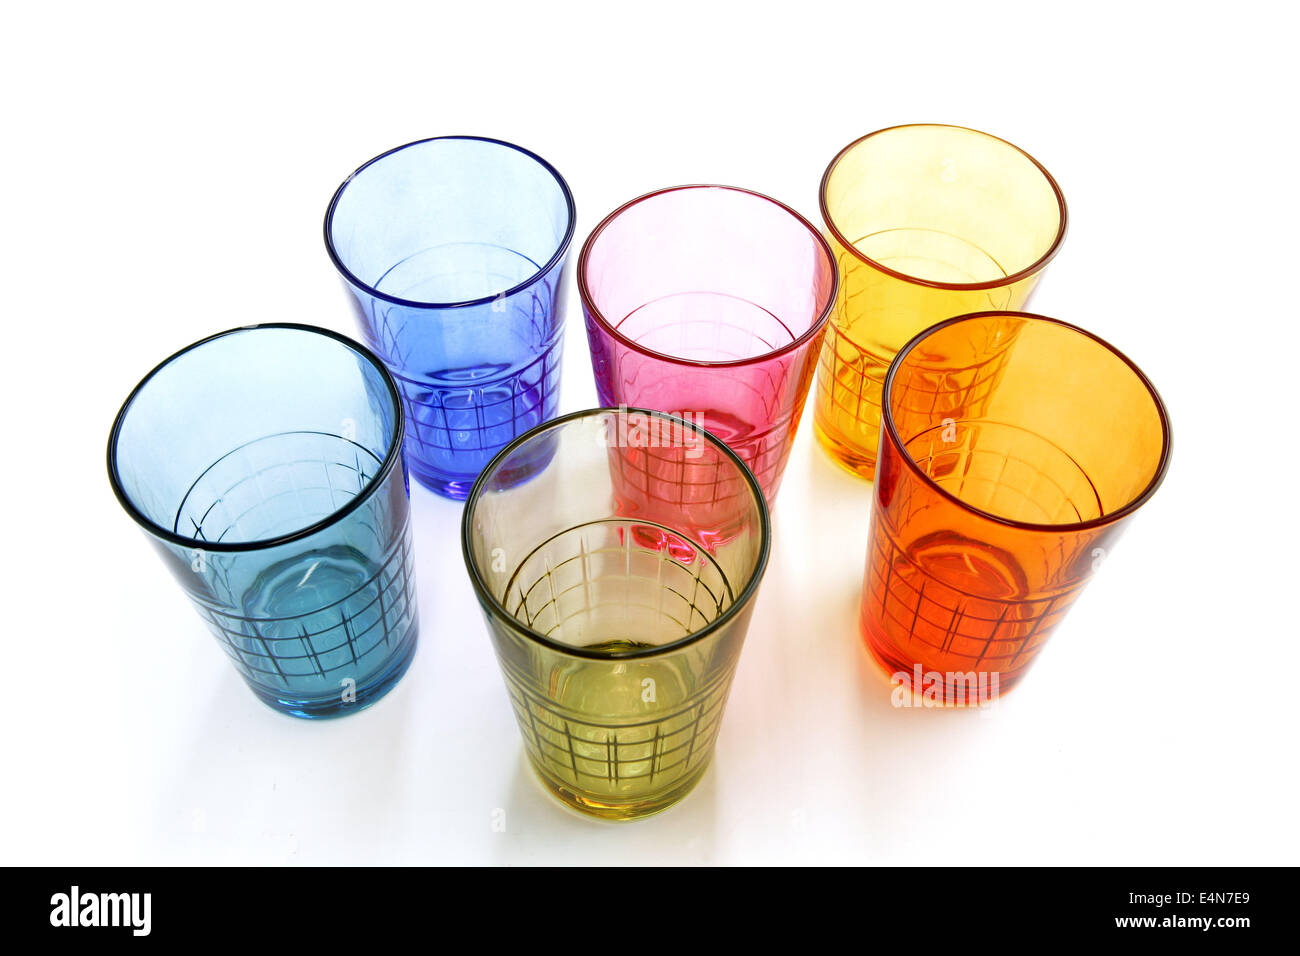 Selection on colorful drinking glasses Stock Photo